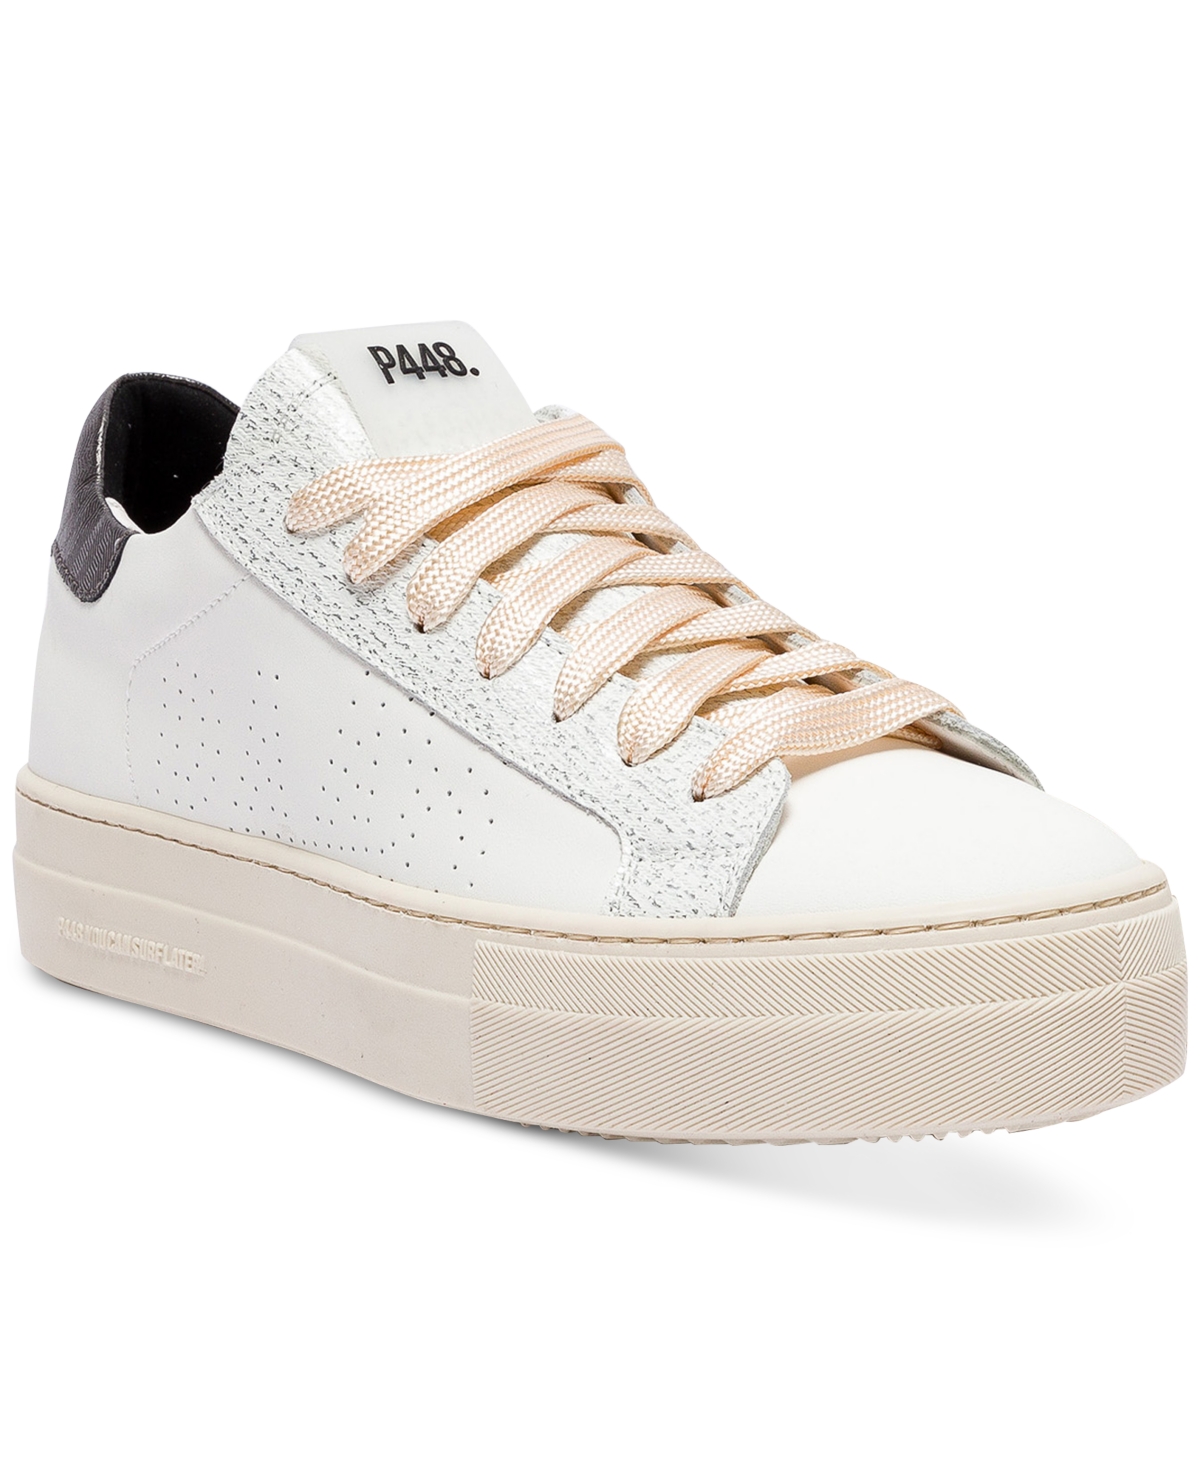 Women's Thea Lace-Up Low-Top Platform Sneakers - Chalk